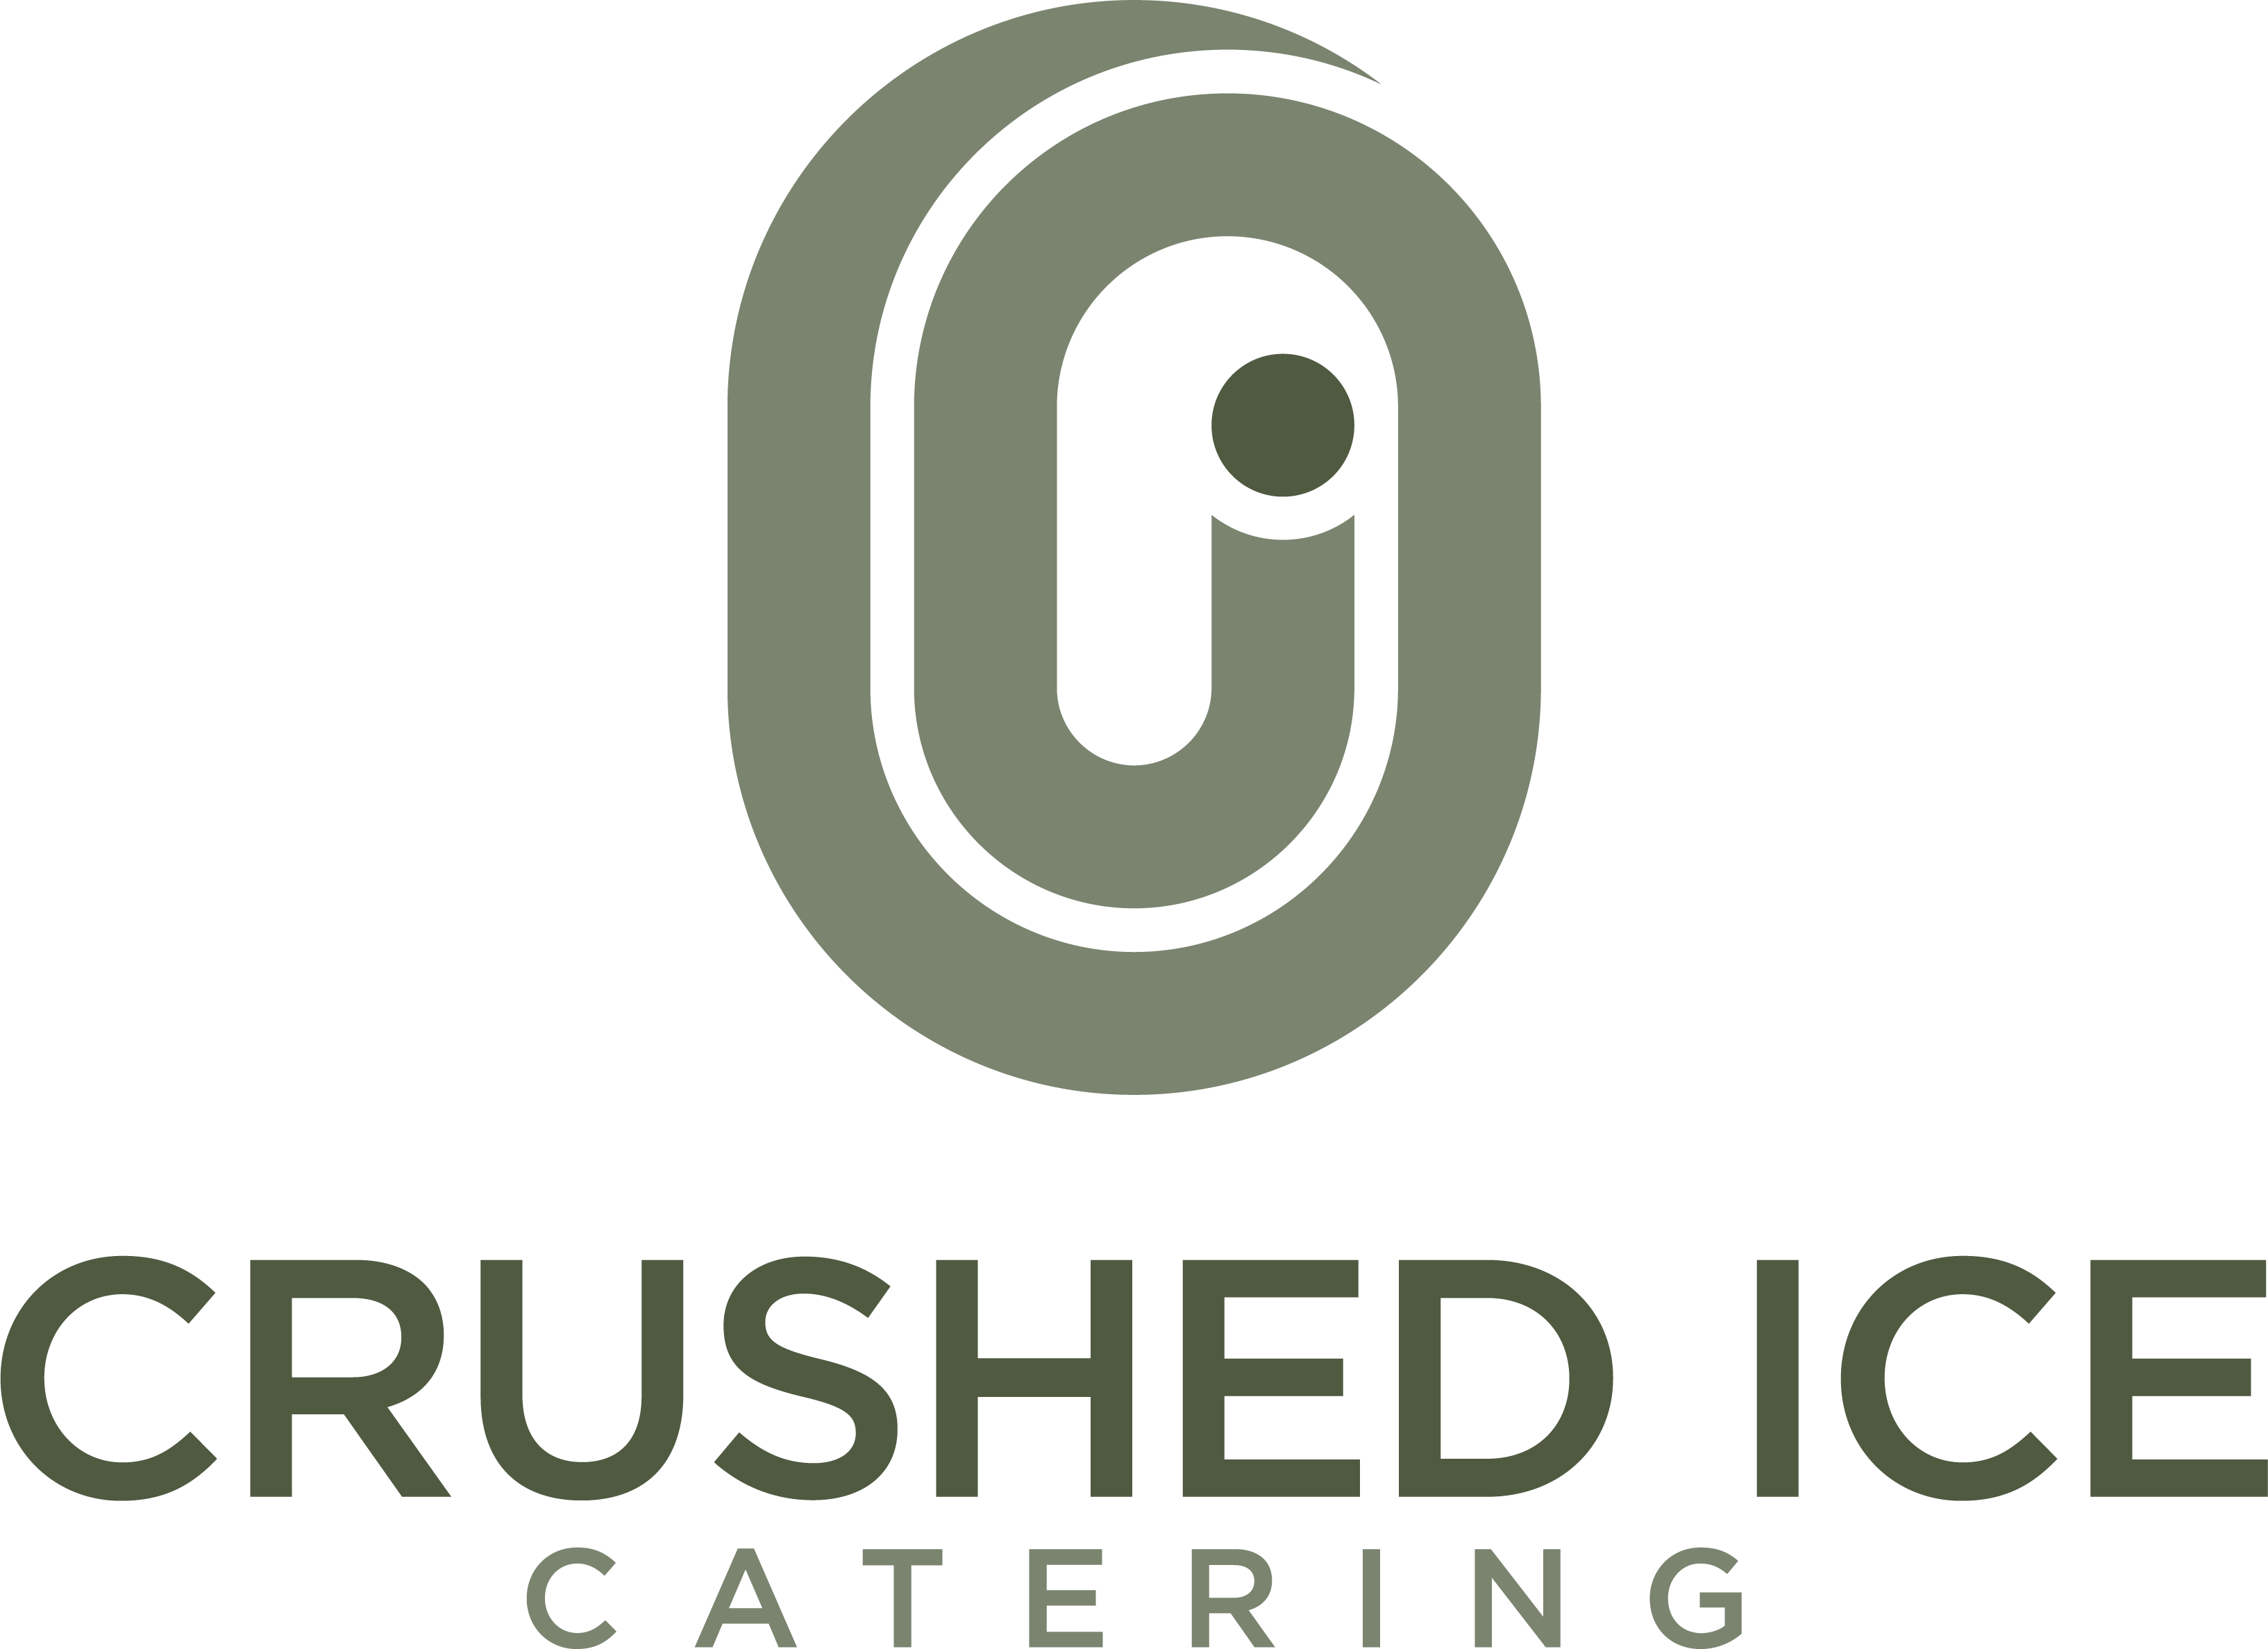 Crushed Ice Catering